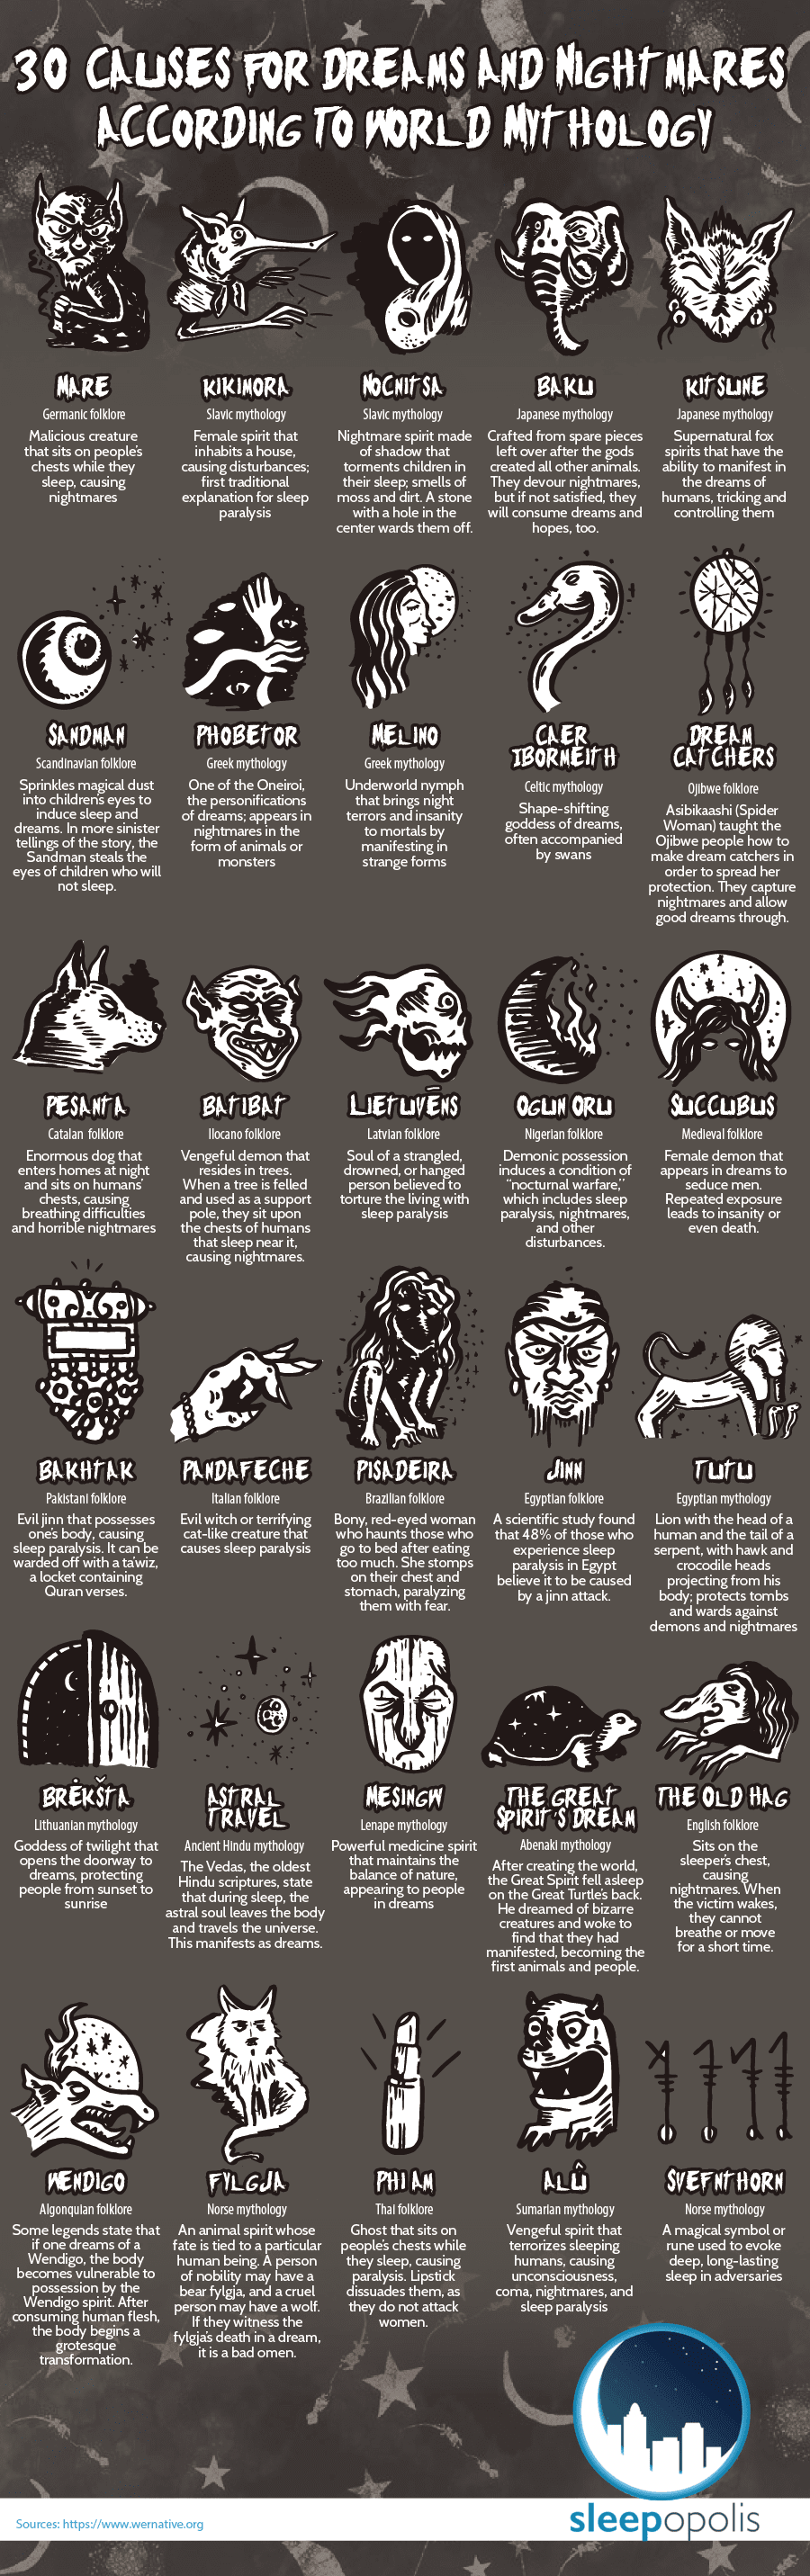 30 Causes of Dreams and Nightmares According to World Mythology